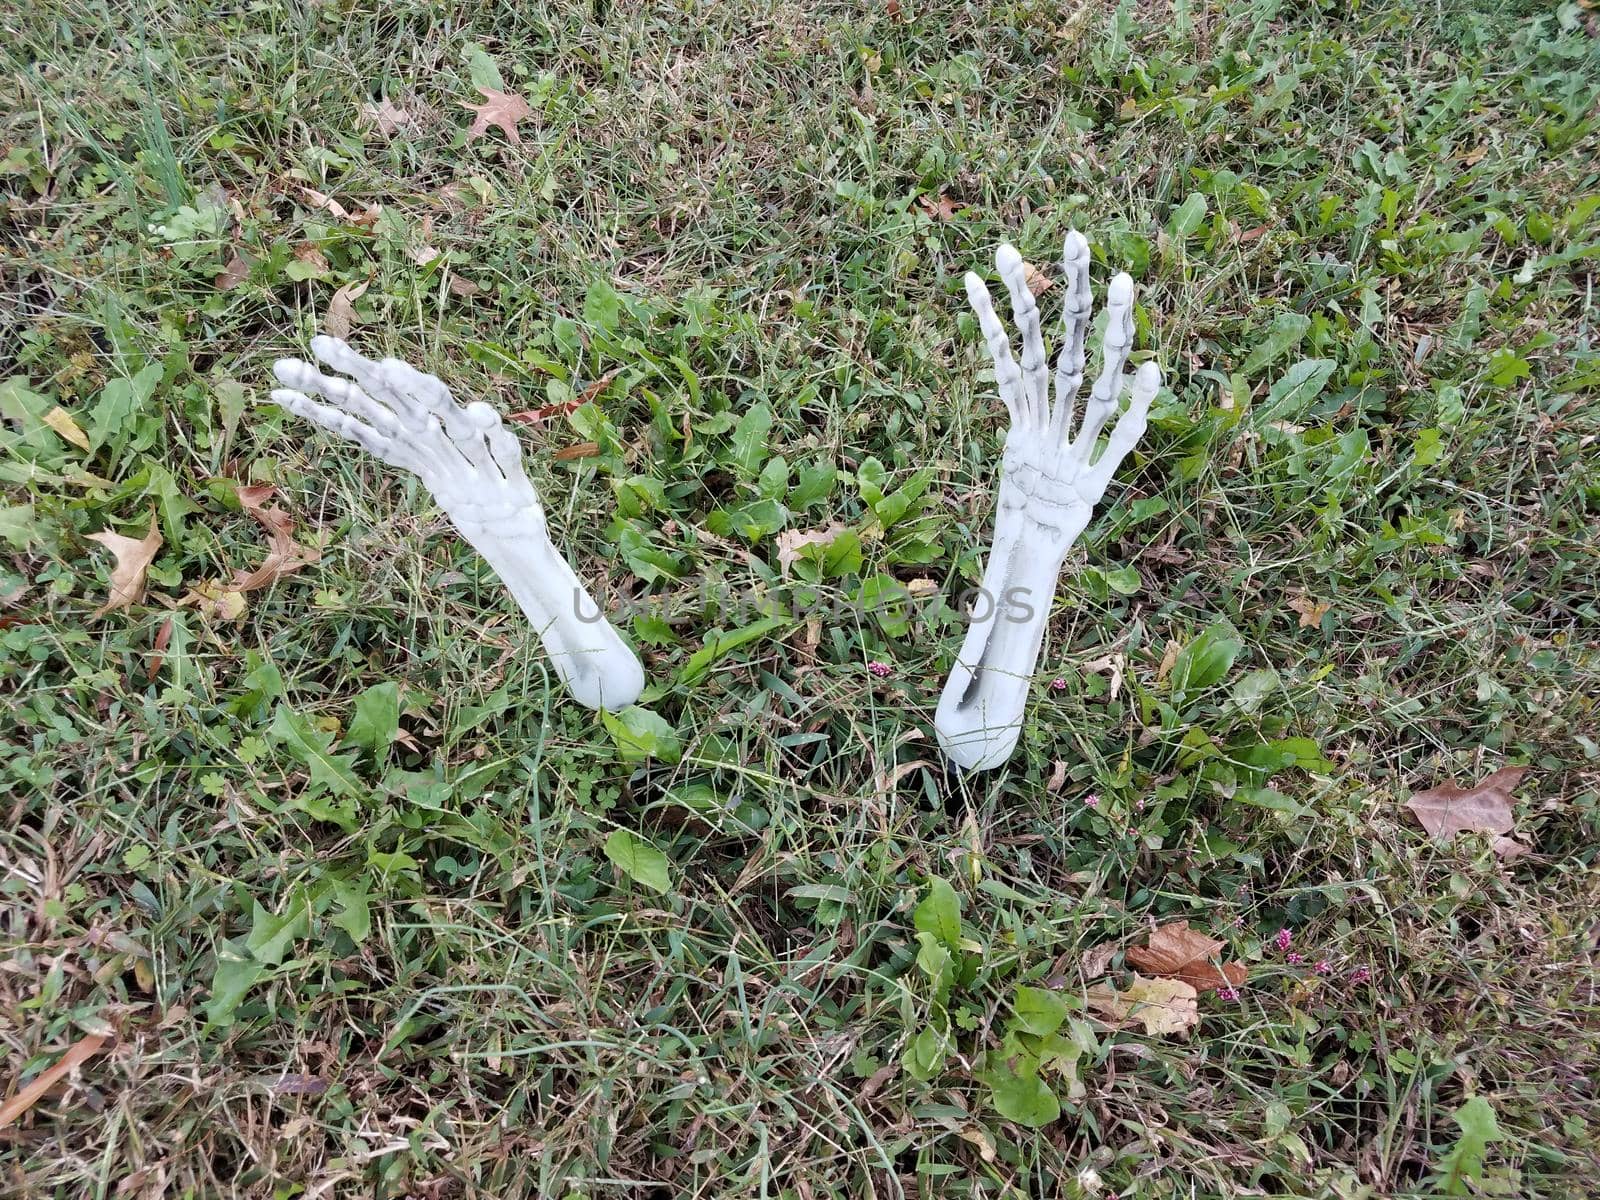 skeleton hands from the ground on lawn Halloween decorations